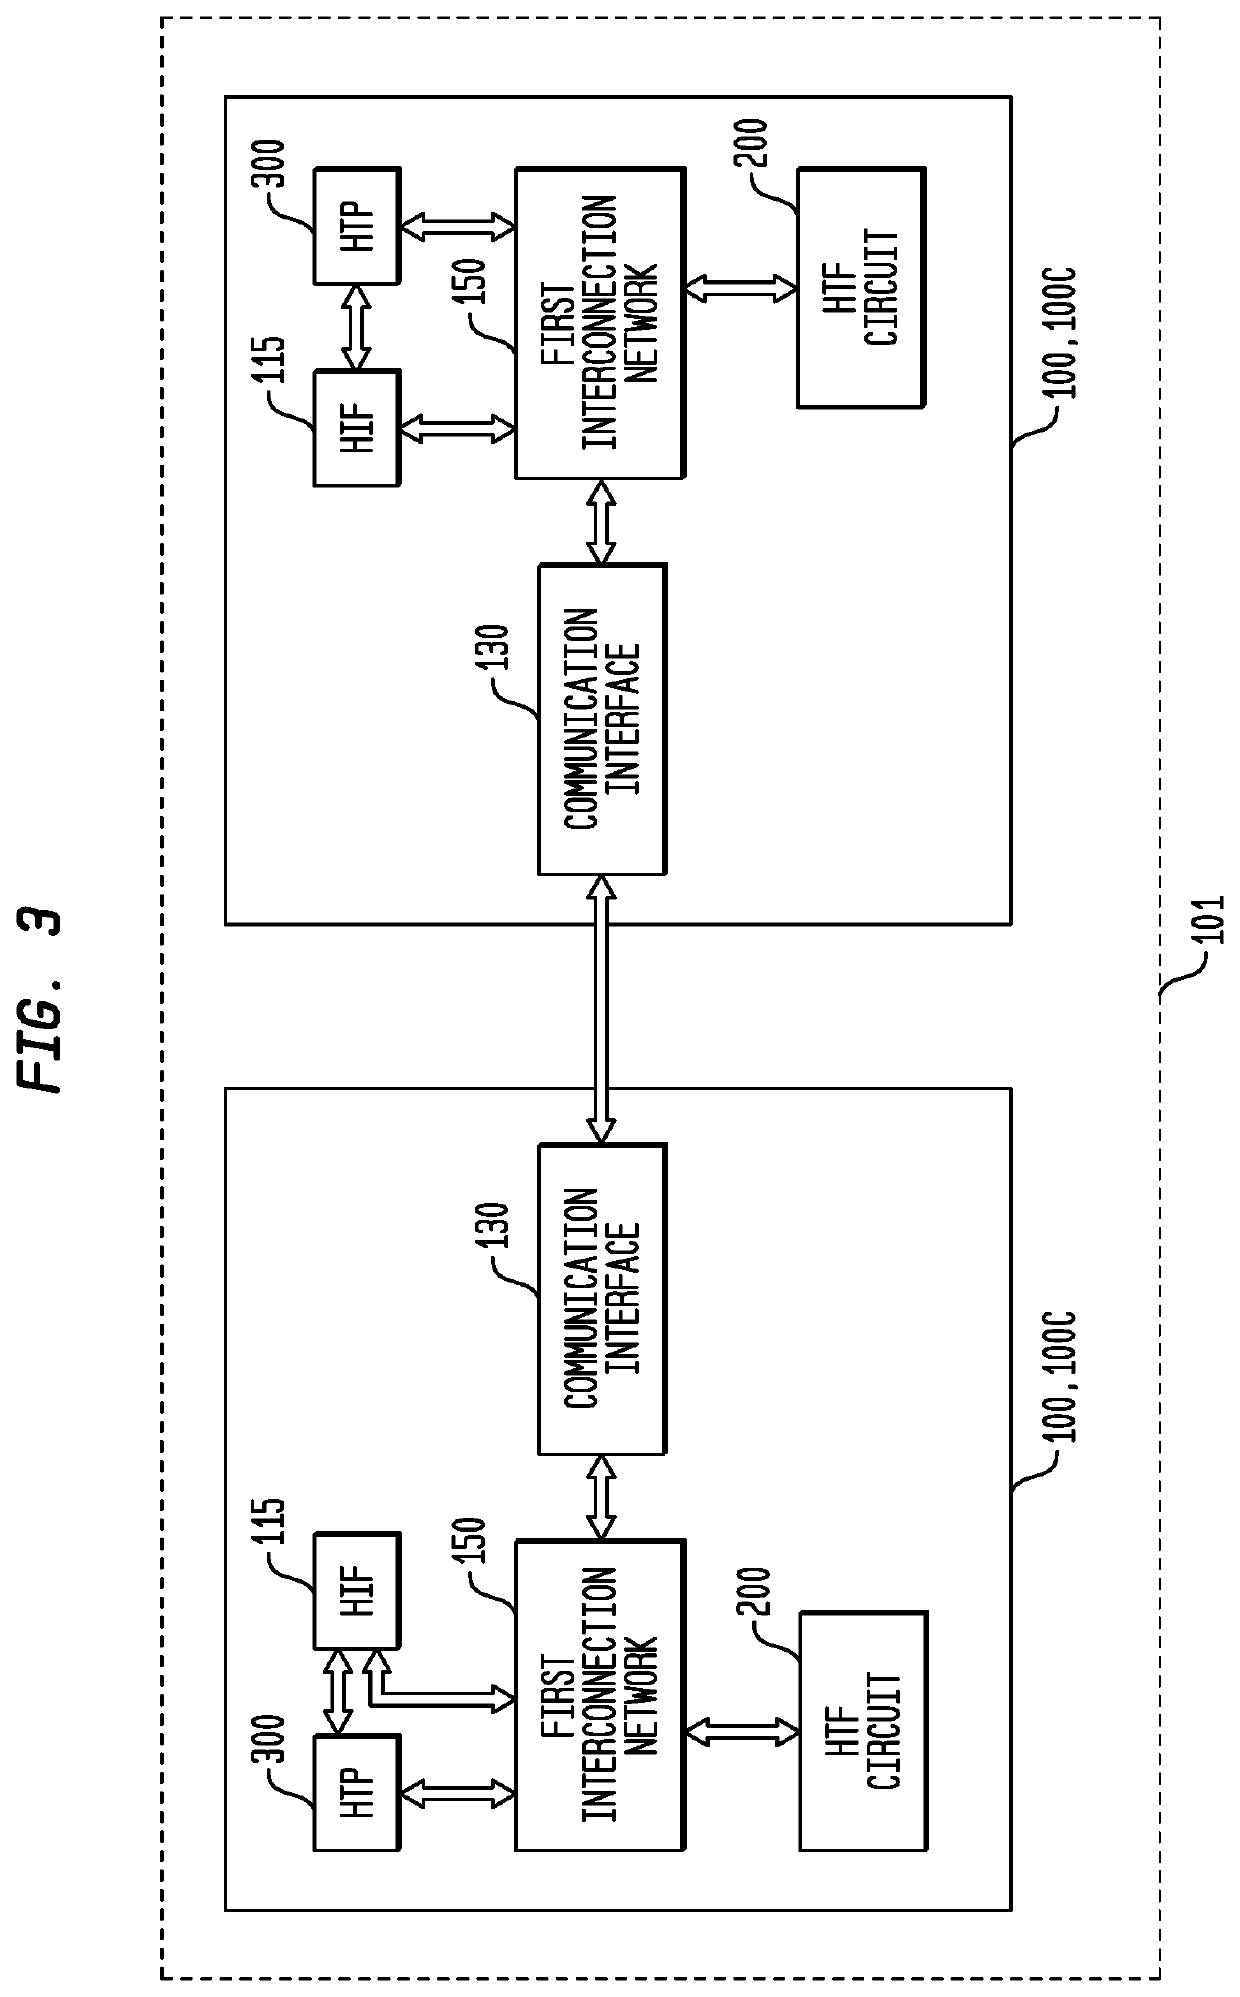 Thread State Monitoring in a System Having a Multi-Threaded, Self-Scheduling Processor